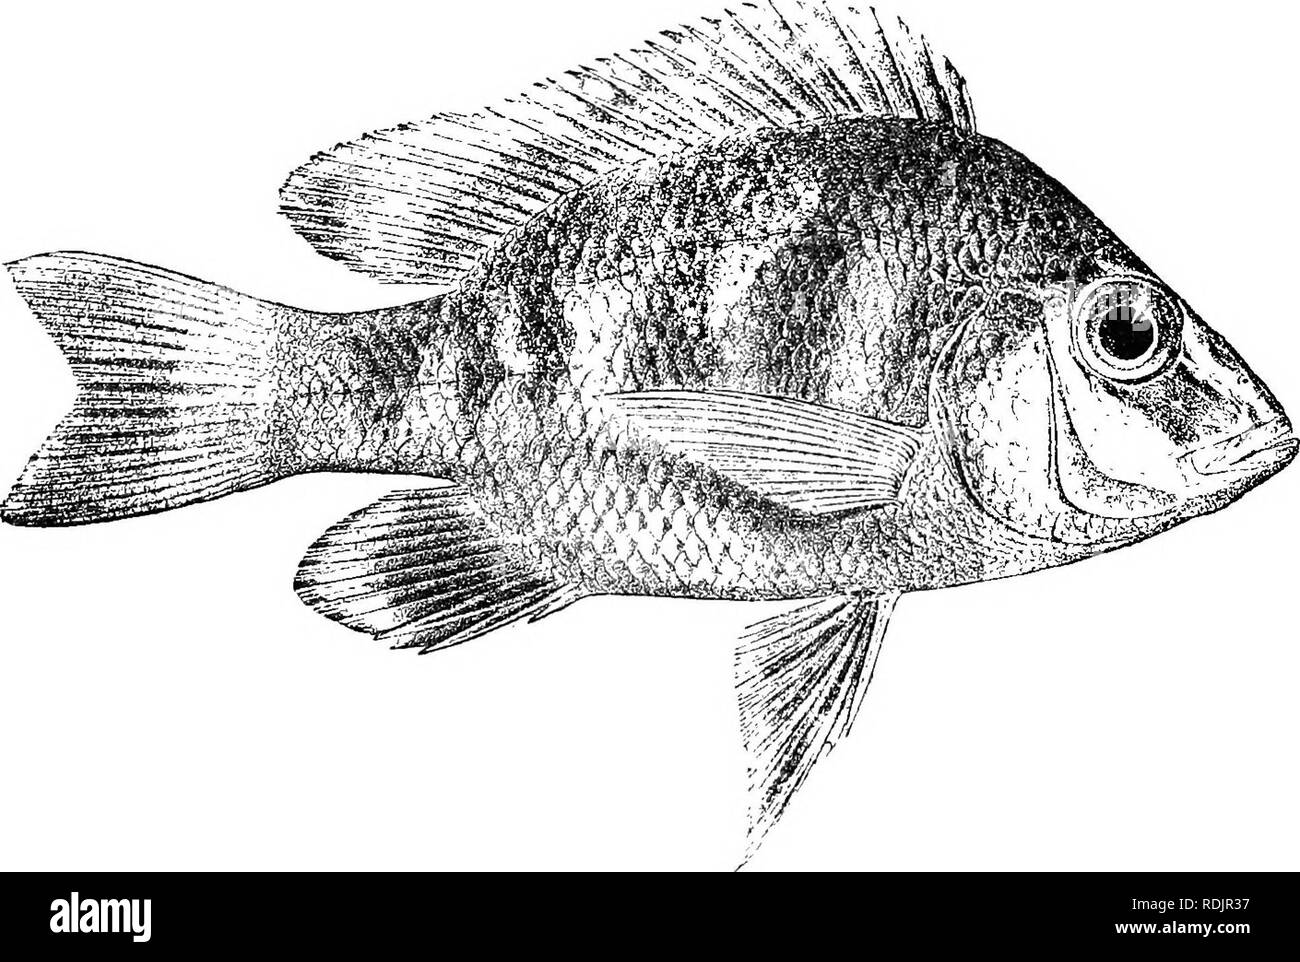 . Catalogue of the fresh-water fishes of Africa in the British museum (Natural history) ... Fishes; Freshwater animals. 2-38 CICHLID.E. 7-10. Ad. 11. Skel. 12. HgT. 13-14. AJ. &amp; hgr. 15-23. Yg. Niamkolo, Uvira. Kilewa Bay. Mouth of Luknga R. Dr. W. A. Cunnington. Dr. L. Stappers (C). rig. 174.. Tiliipni oliy iciiiithiis. After Steindachner {I. c). ^. 87. TILAPIA OLIGACANTHUS. Bleek. Versl. Ak. Amsterd. ii. 1868, p. 309, and Poiss. Madag. p. 11, j)l. iv. fig. 1 (1874); Bouleng. Proc. Zool. Soc. 1899, p. 138. Ptycliocliromis oligacantlius, Steind. Sitzb. Ak. Wien, Ixxxii. i. 1880, p. 249, pi Stock Photo